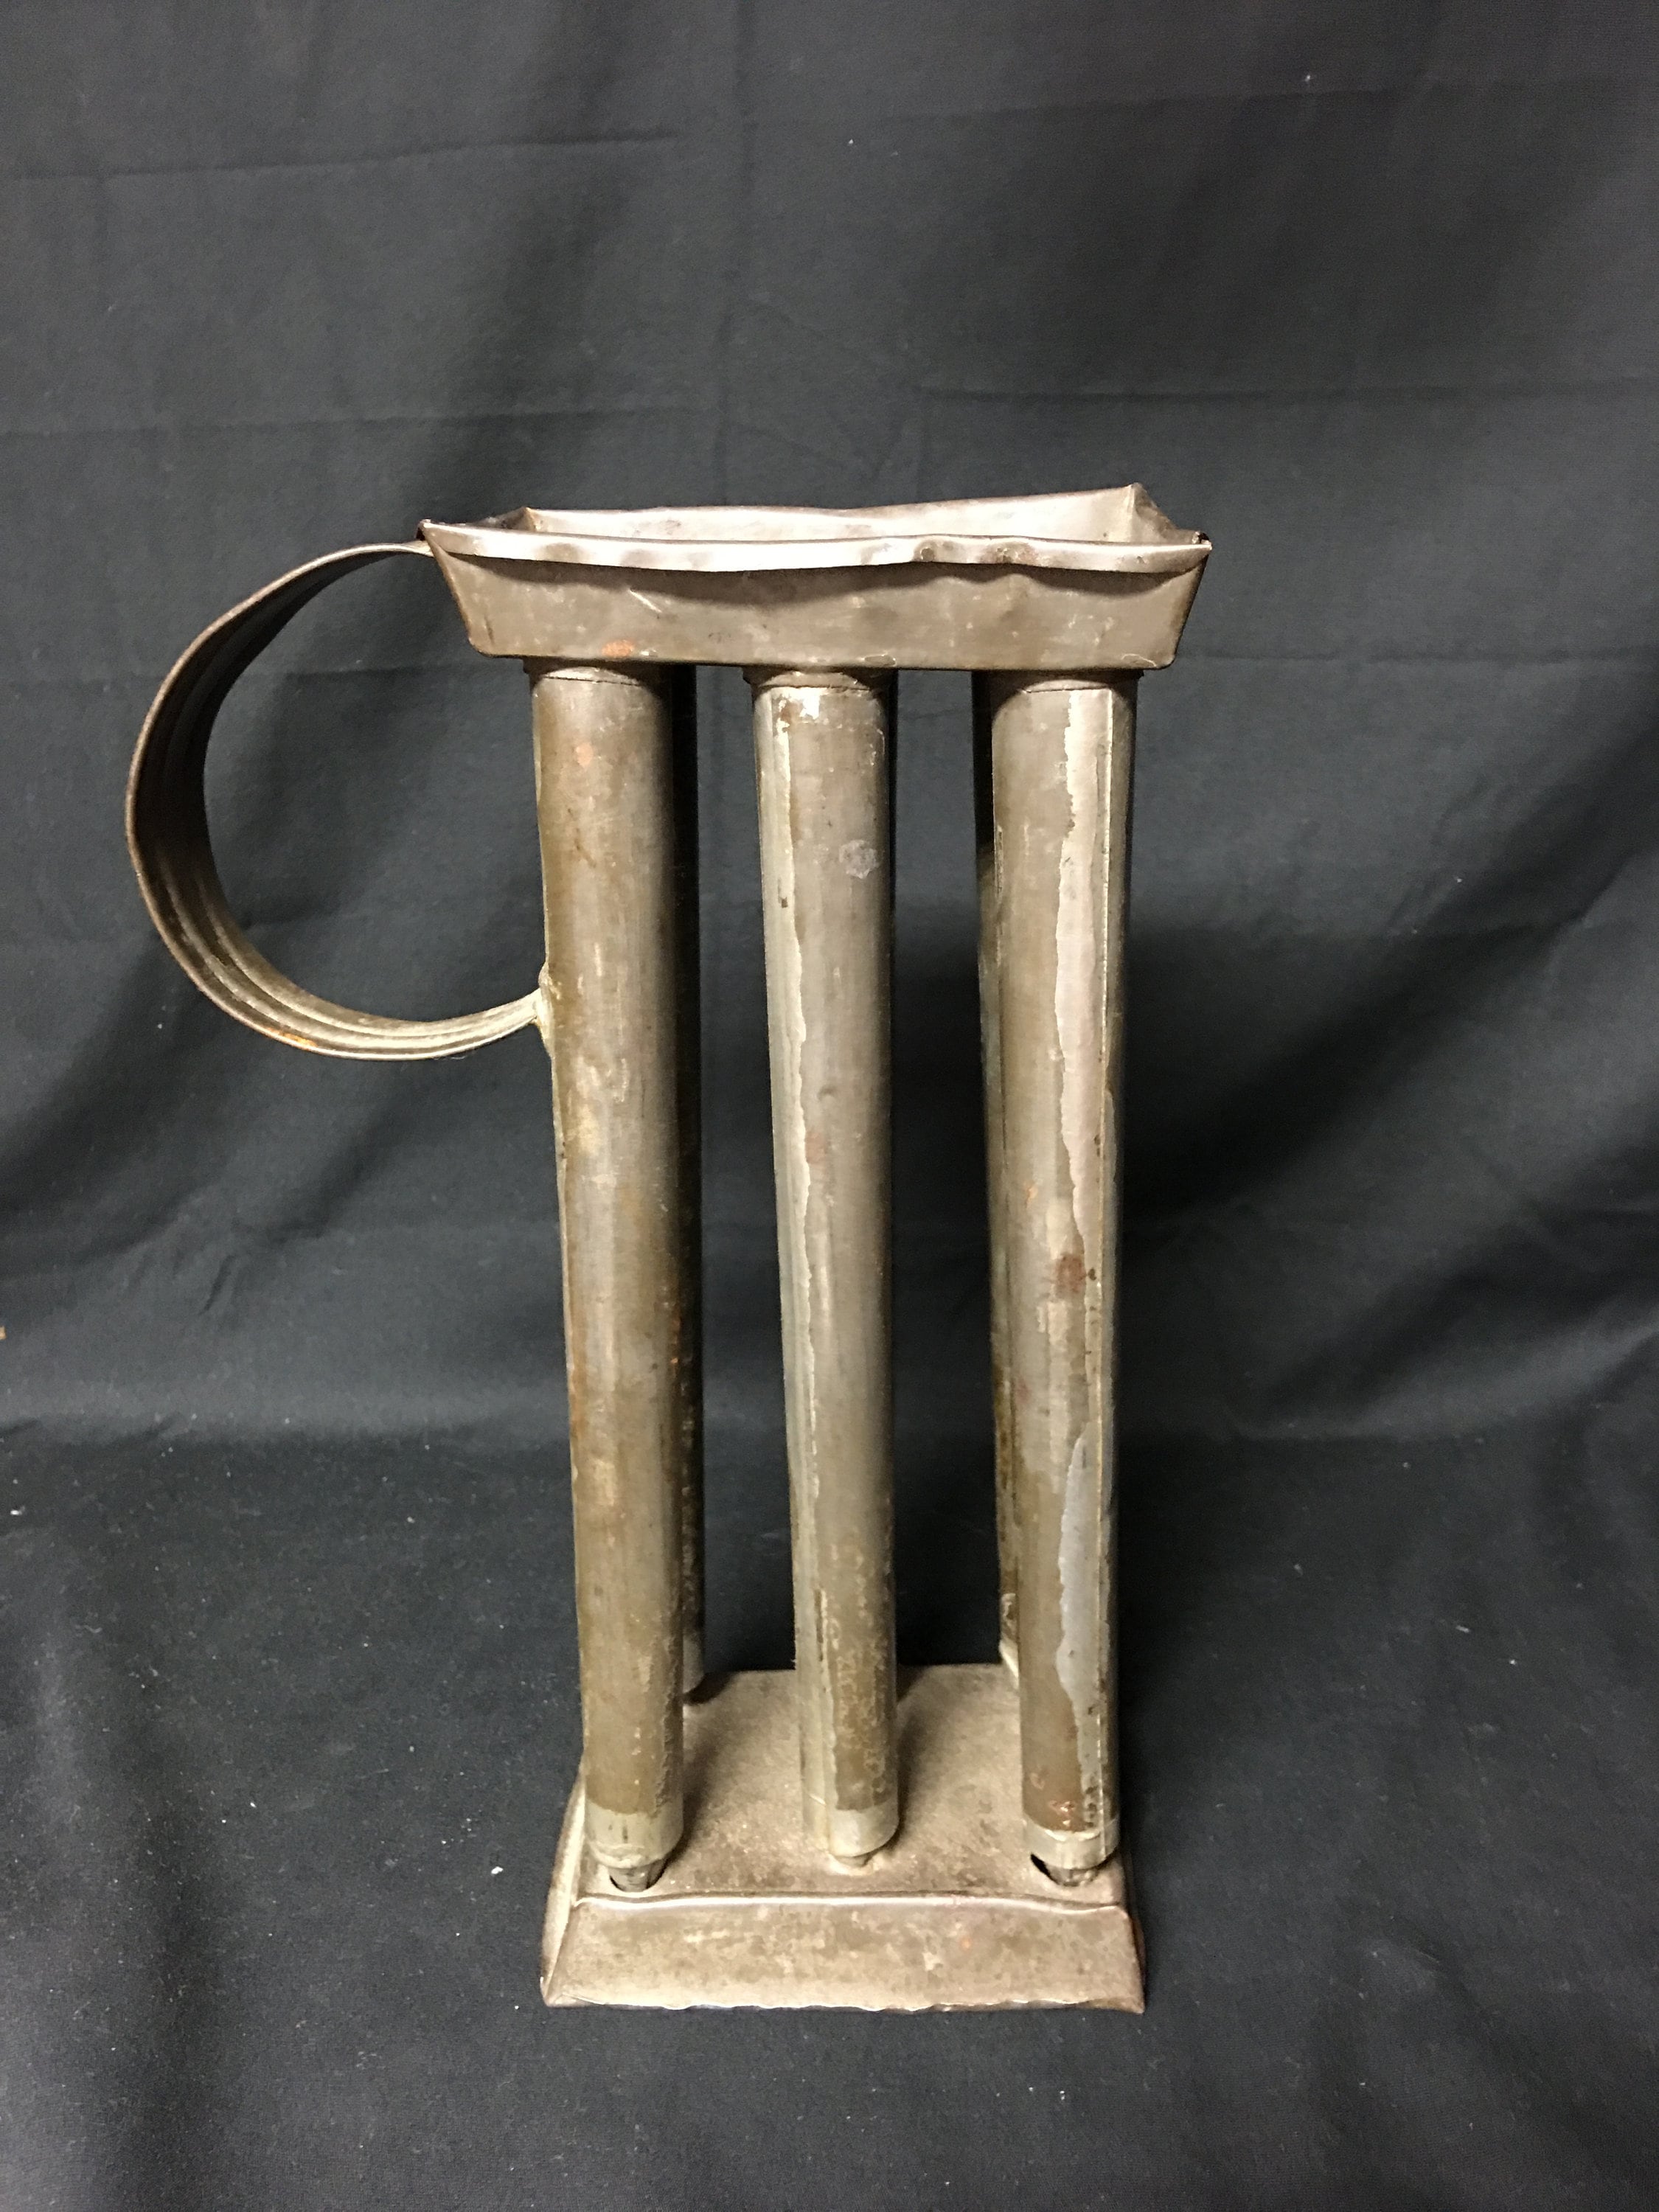 Antique Tin 6-Mold Taper Candle Mold, 9 Candles - Free US Shipping